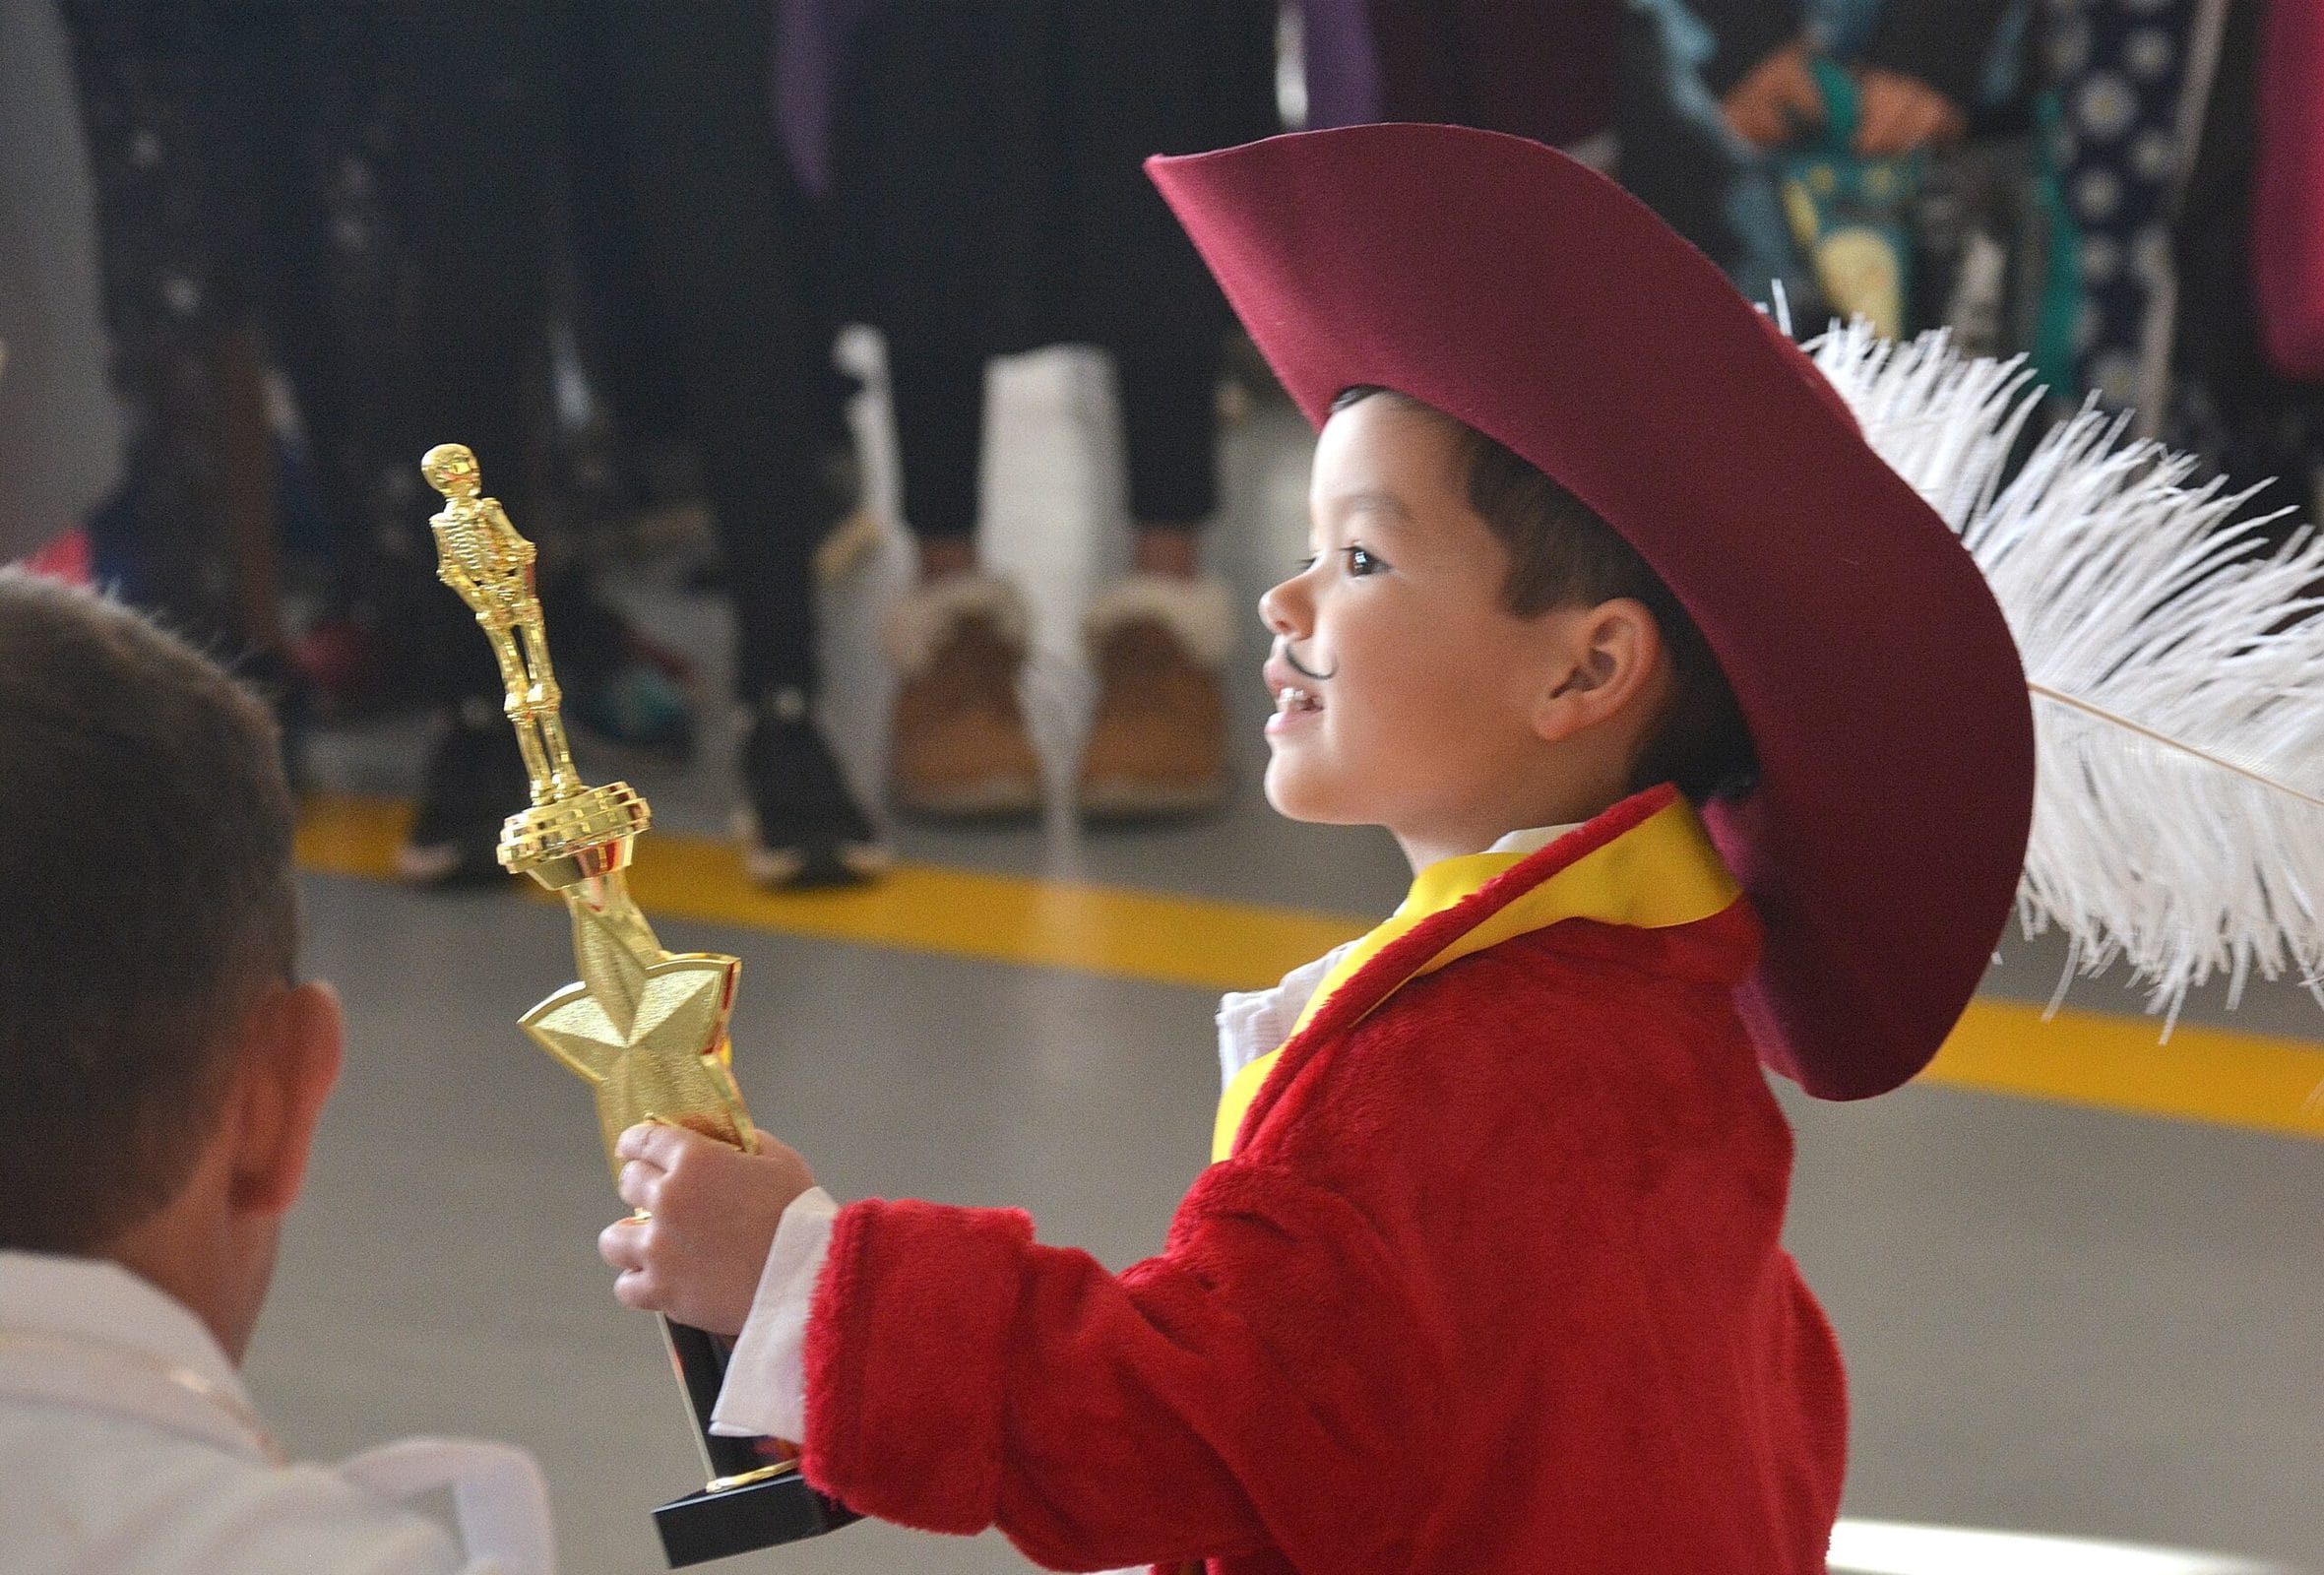 Dominic Rosa, 3, costumed as Captain Hook, accepts the trophy for most original costume runner-up in his age category. Joining him in the parade were his mother Kaite as Peter Pan and father Miguel as Mr. Smee. (Photo/Ed Karvoski Jr.)